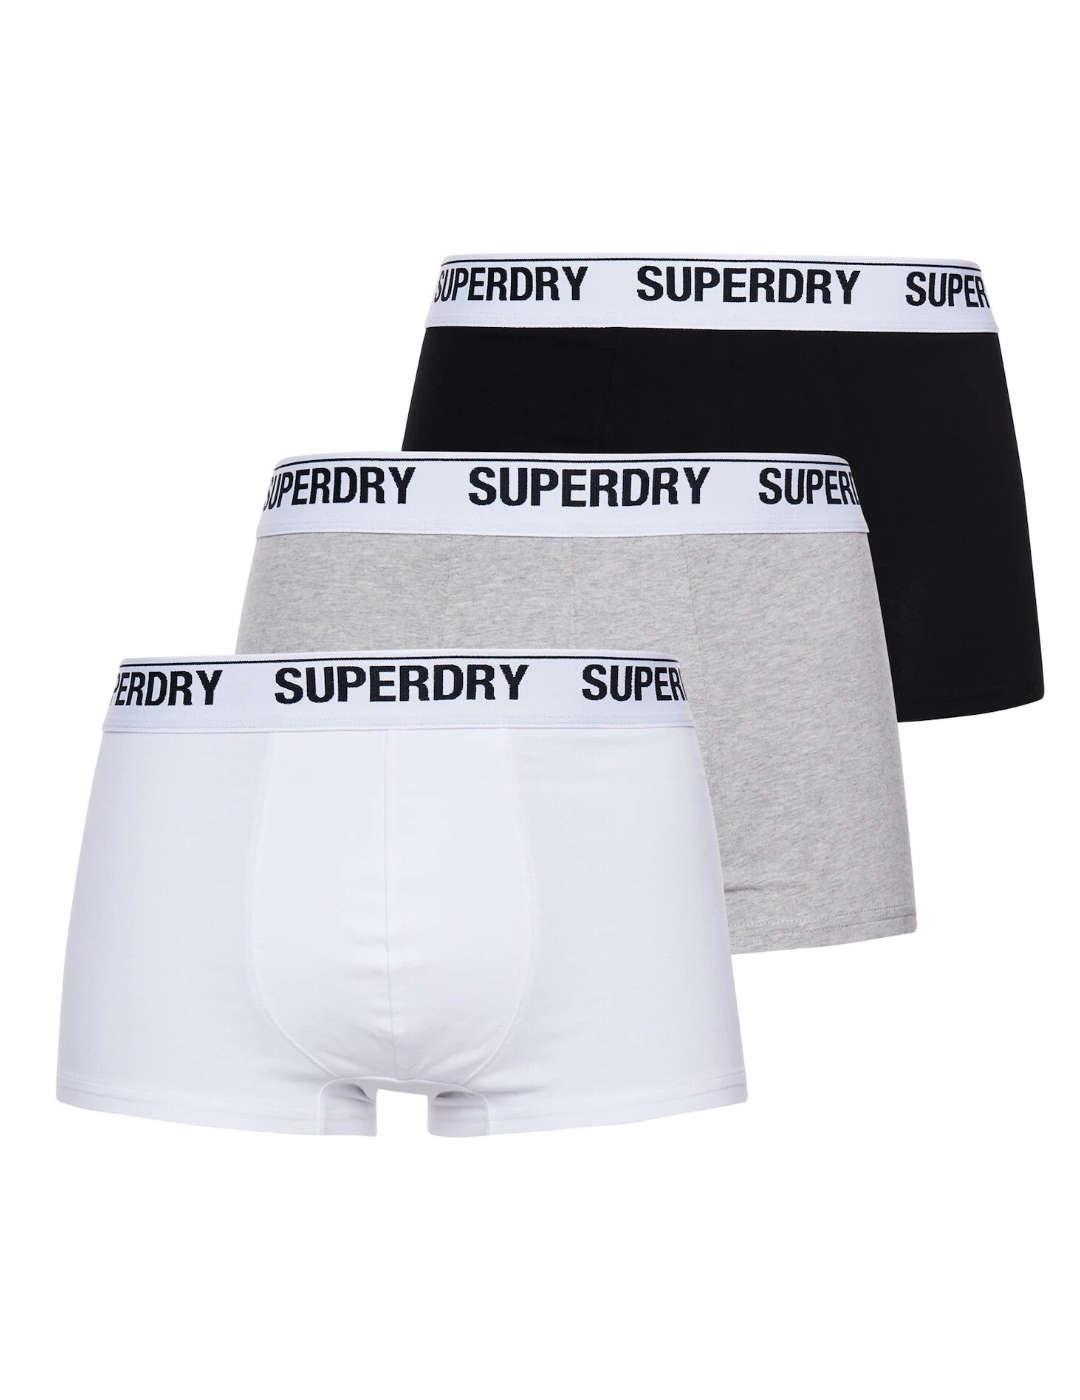 Intimo Superdry pack-3 gris/negro/blanco hombre